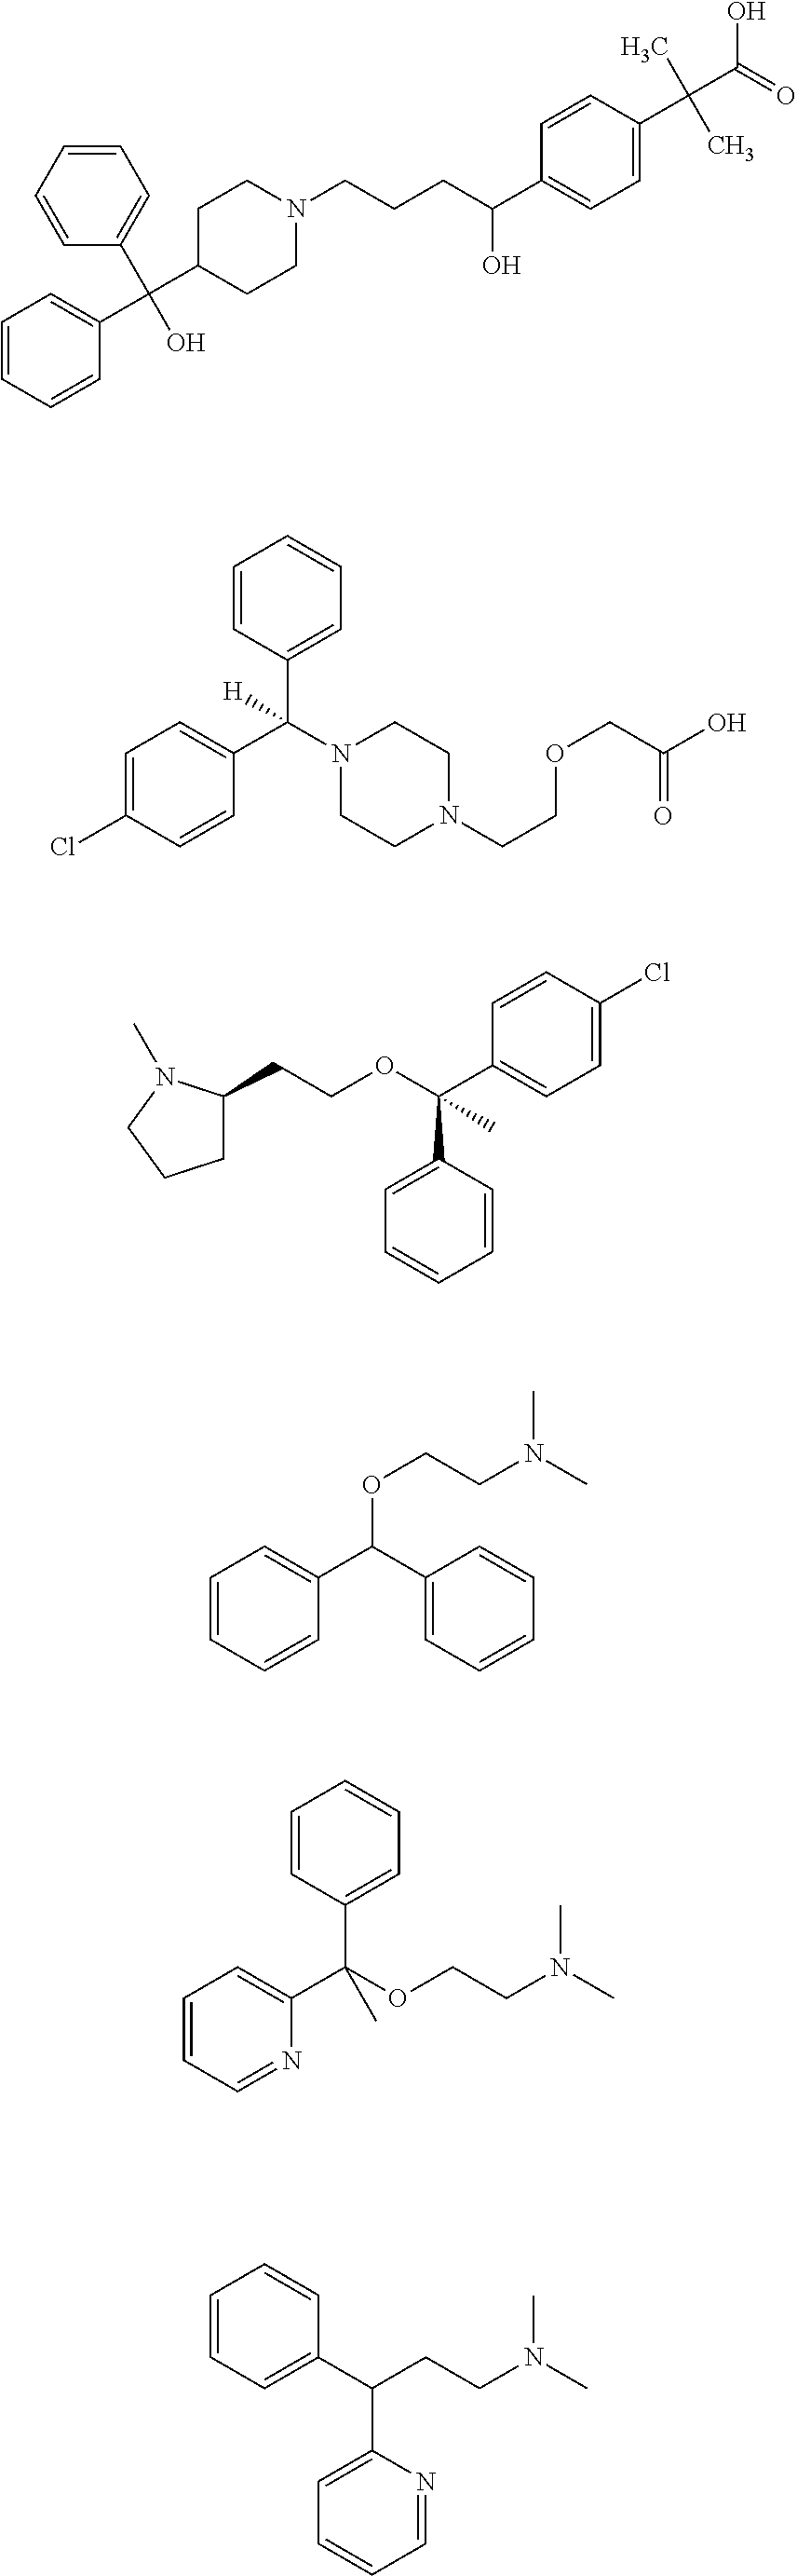 Systems and methods for treatment of allergies and other indications